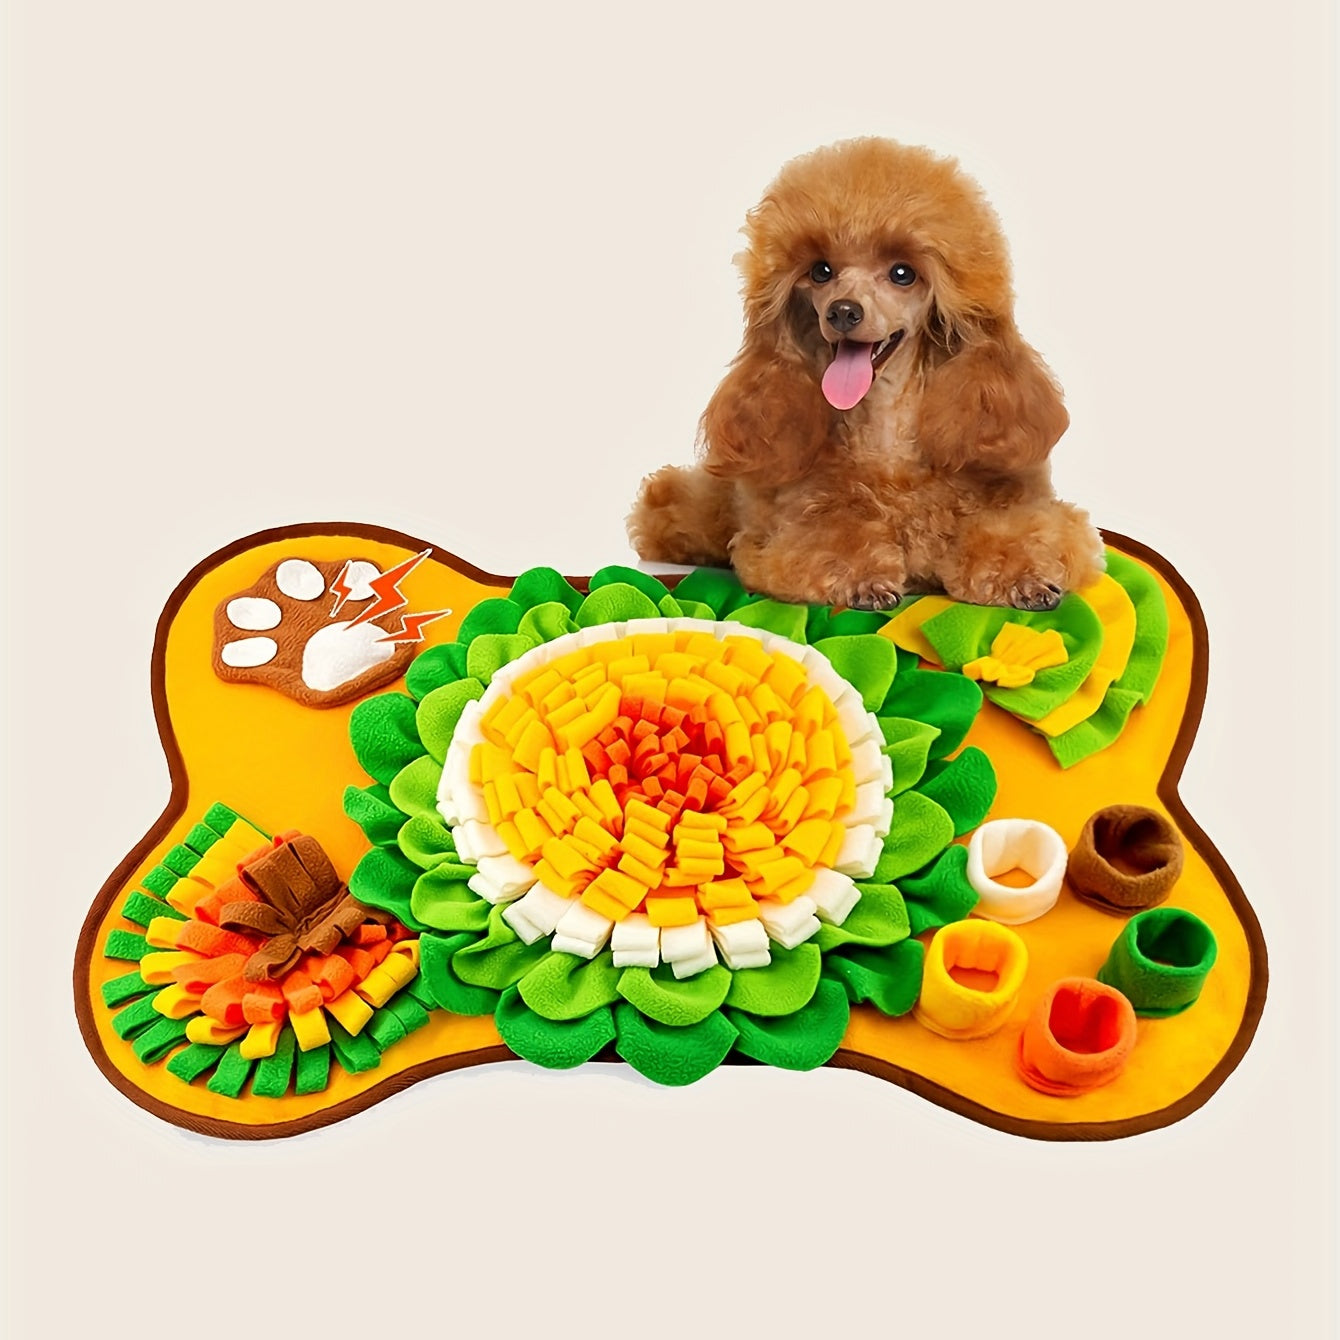 Interactive Dog Snuffle Mat for Slow Feeding and Playful Learning